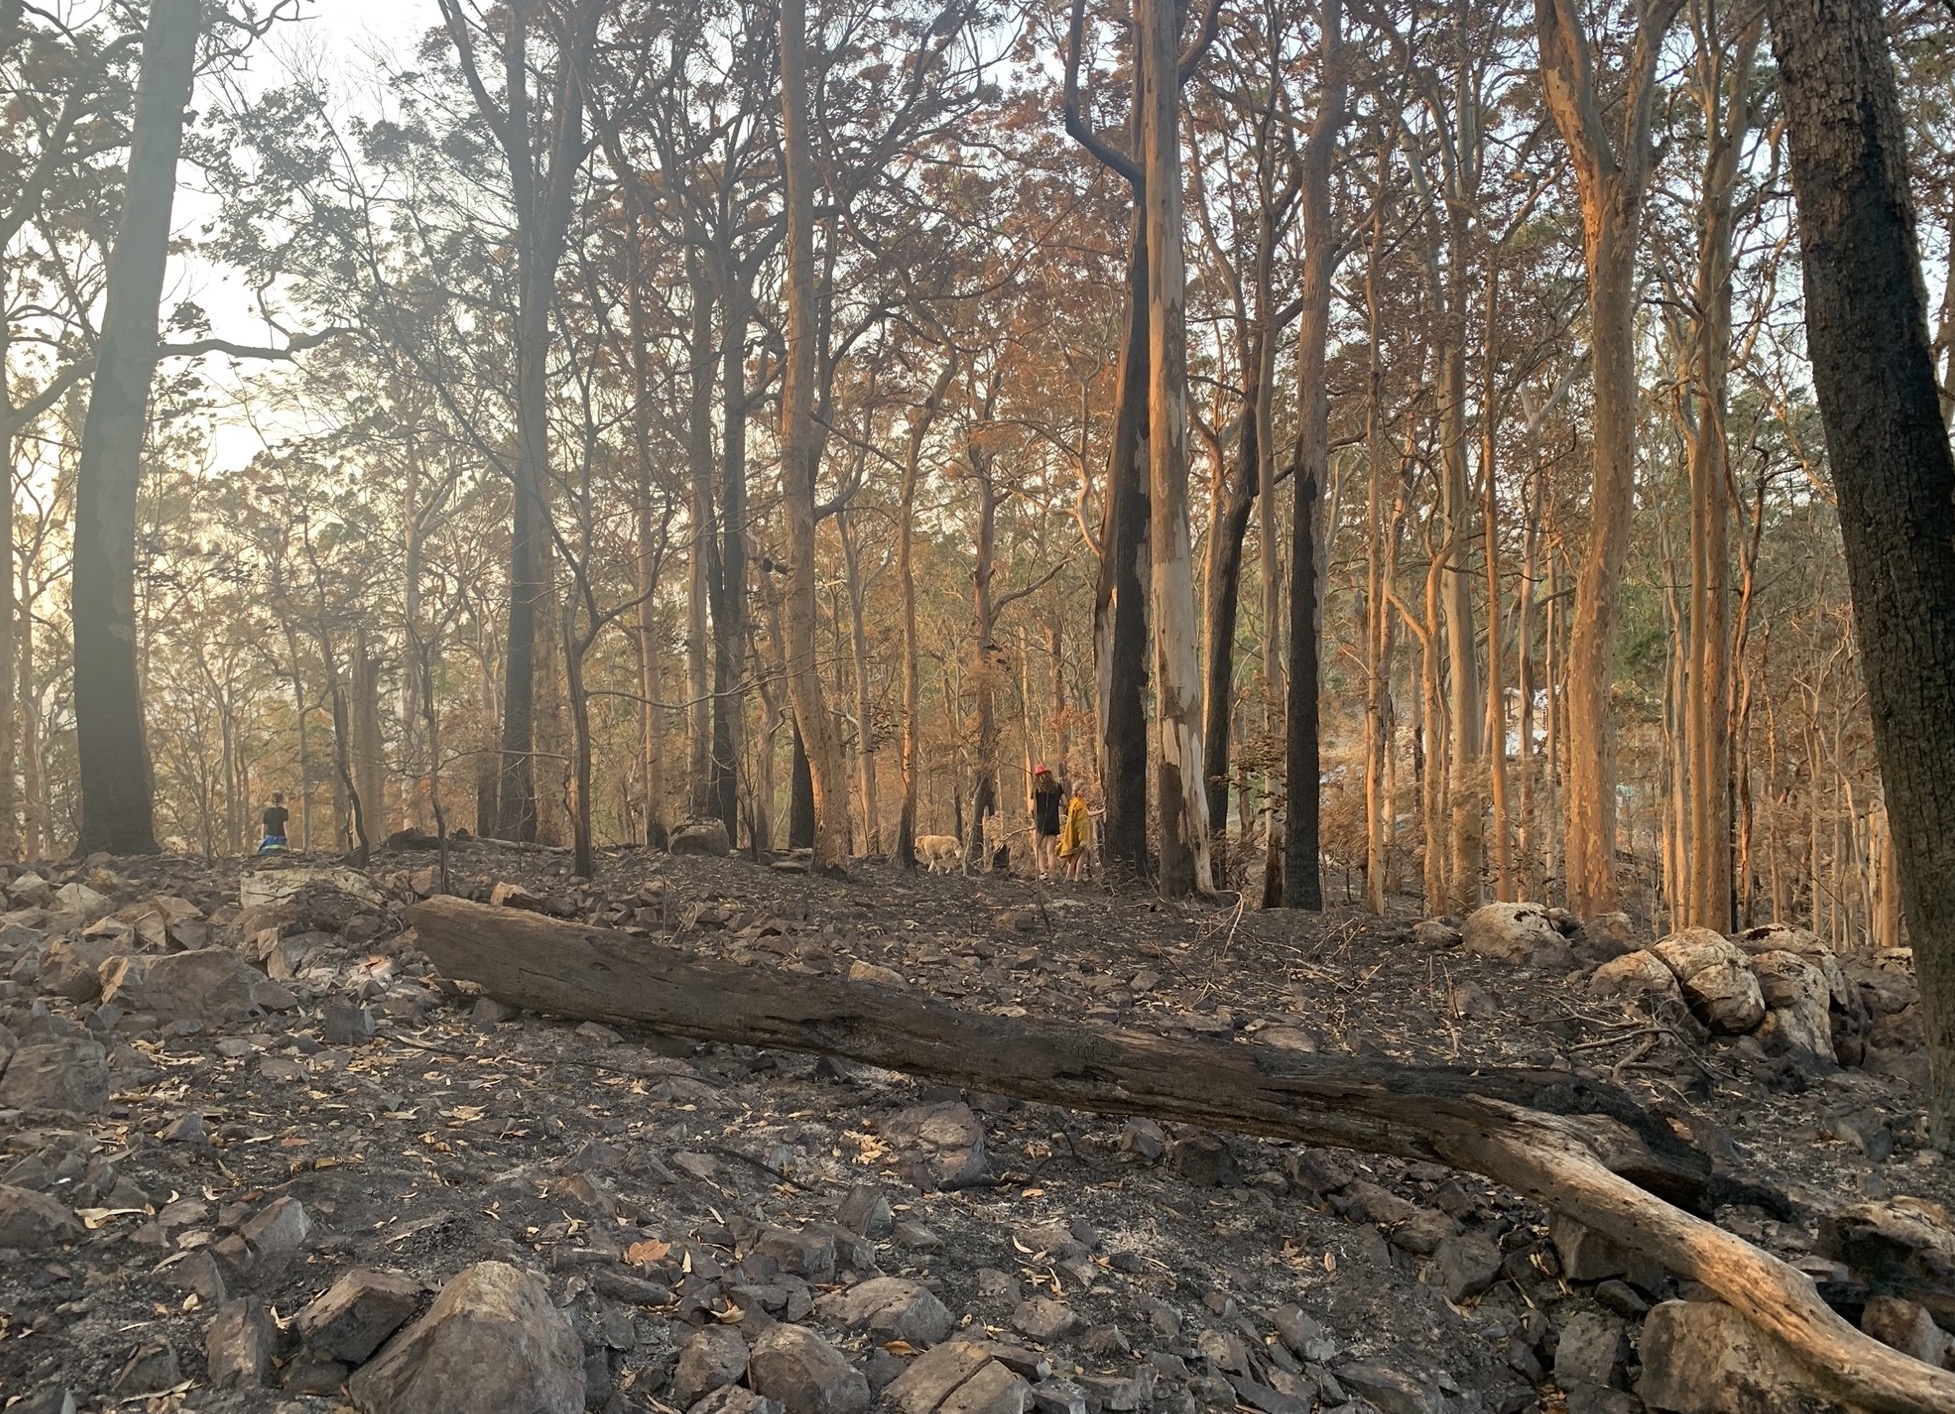 Areas extensively burnt can take time to recover after fire. Photo credit Isabelle Strachan